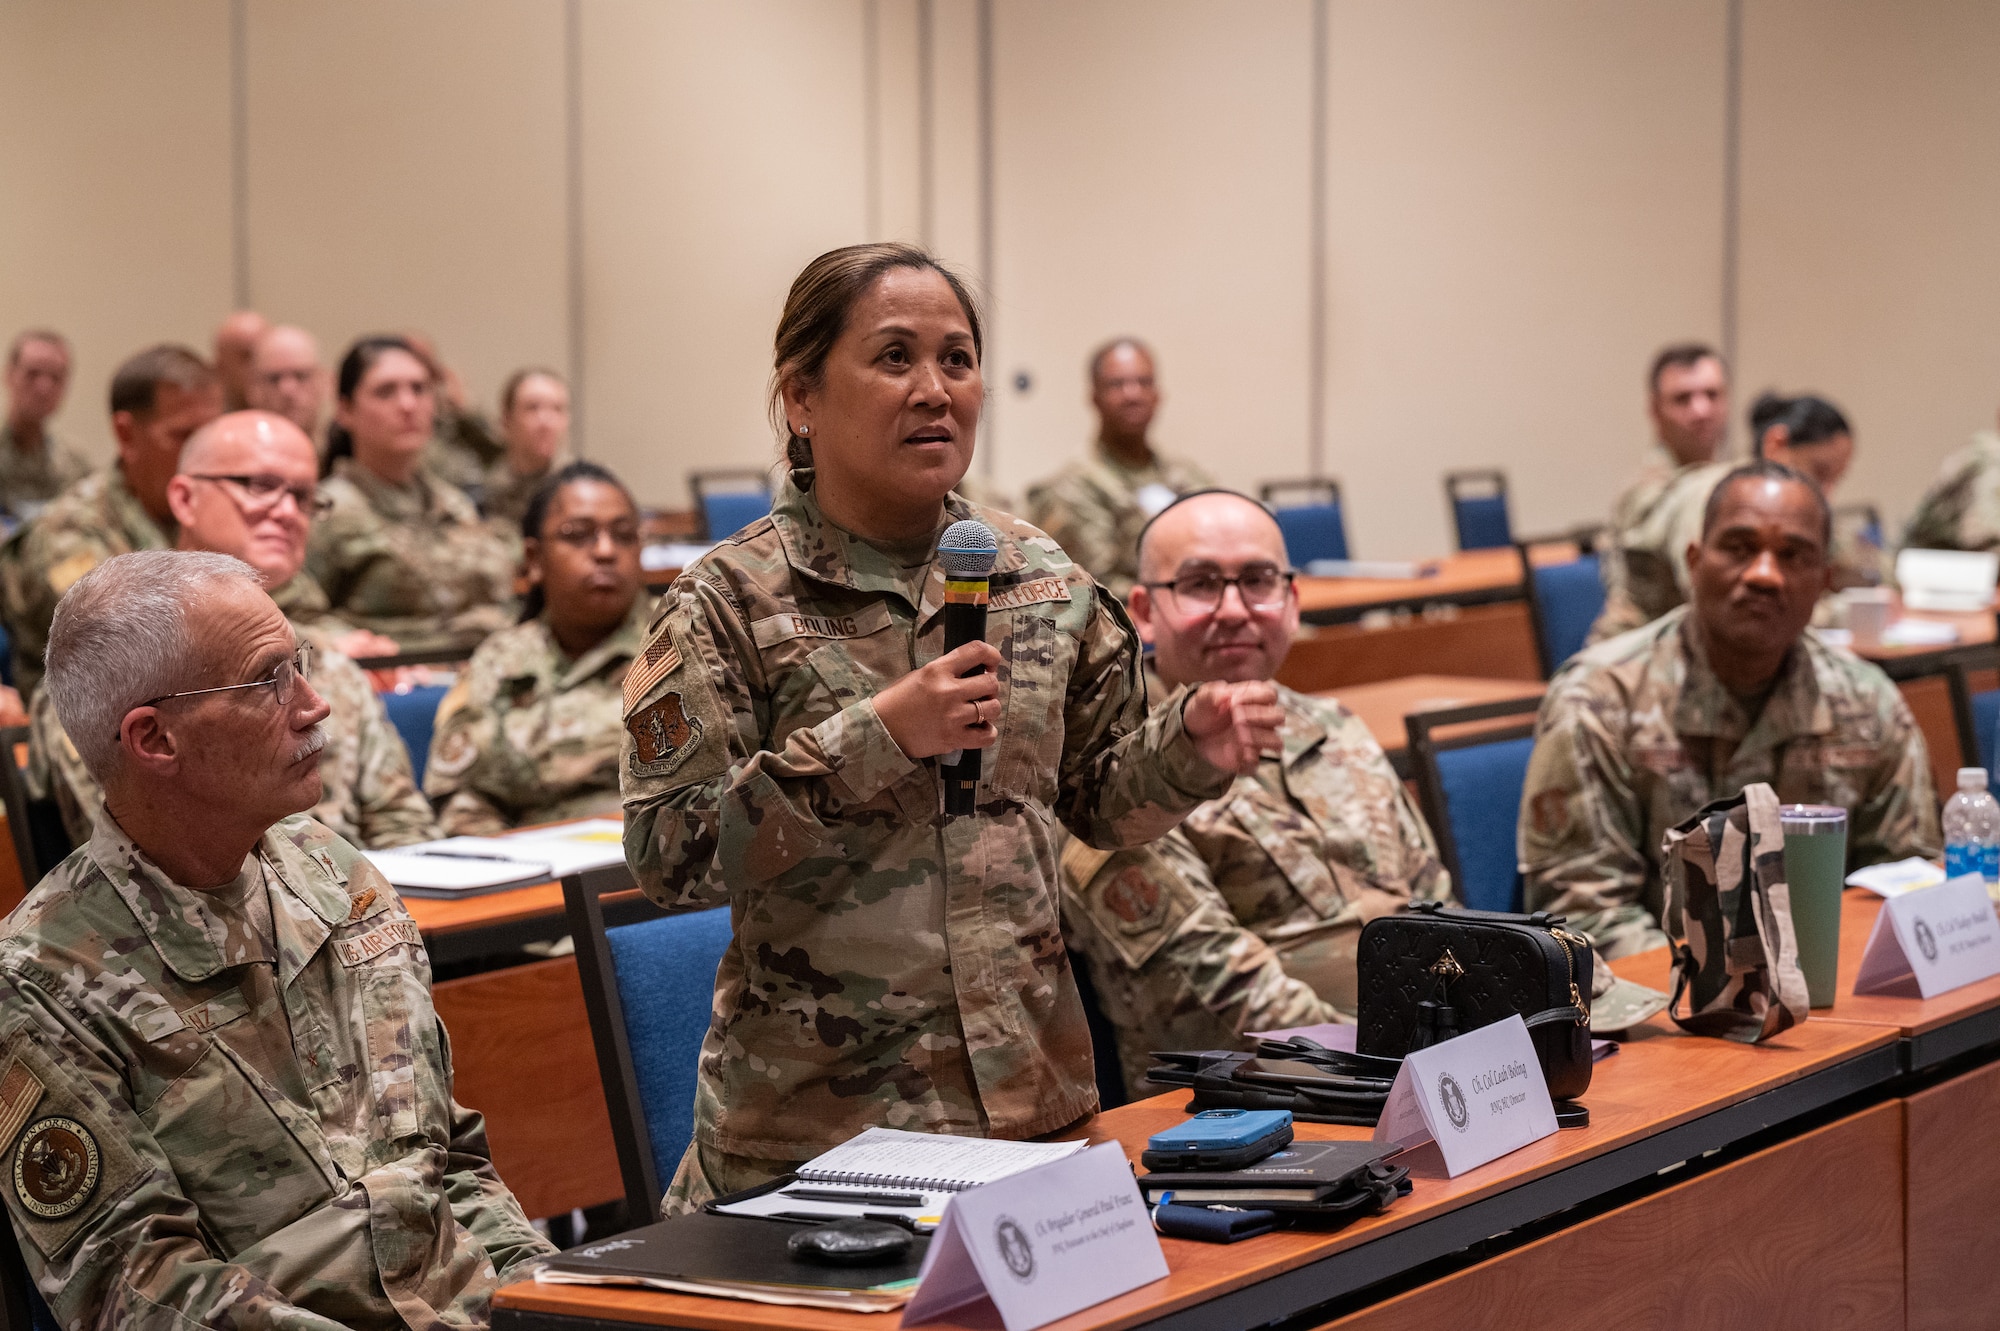 U.S. Air Force Col. Leah Botona Boling, director, Air National Guard (ANG) Chaplain Corps, poses a question for Lt. Gen. Michael A. Loh, director, ANG, during the ANG Chaplain Corps Senior Religious Support Team Symposium in Arlington, Virginia, May 17, 2023.